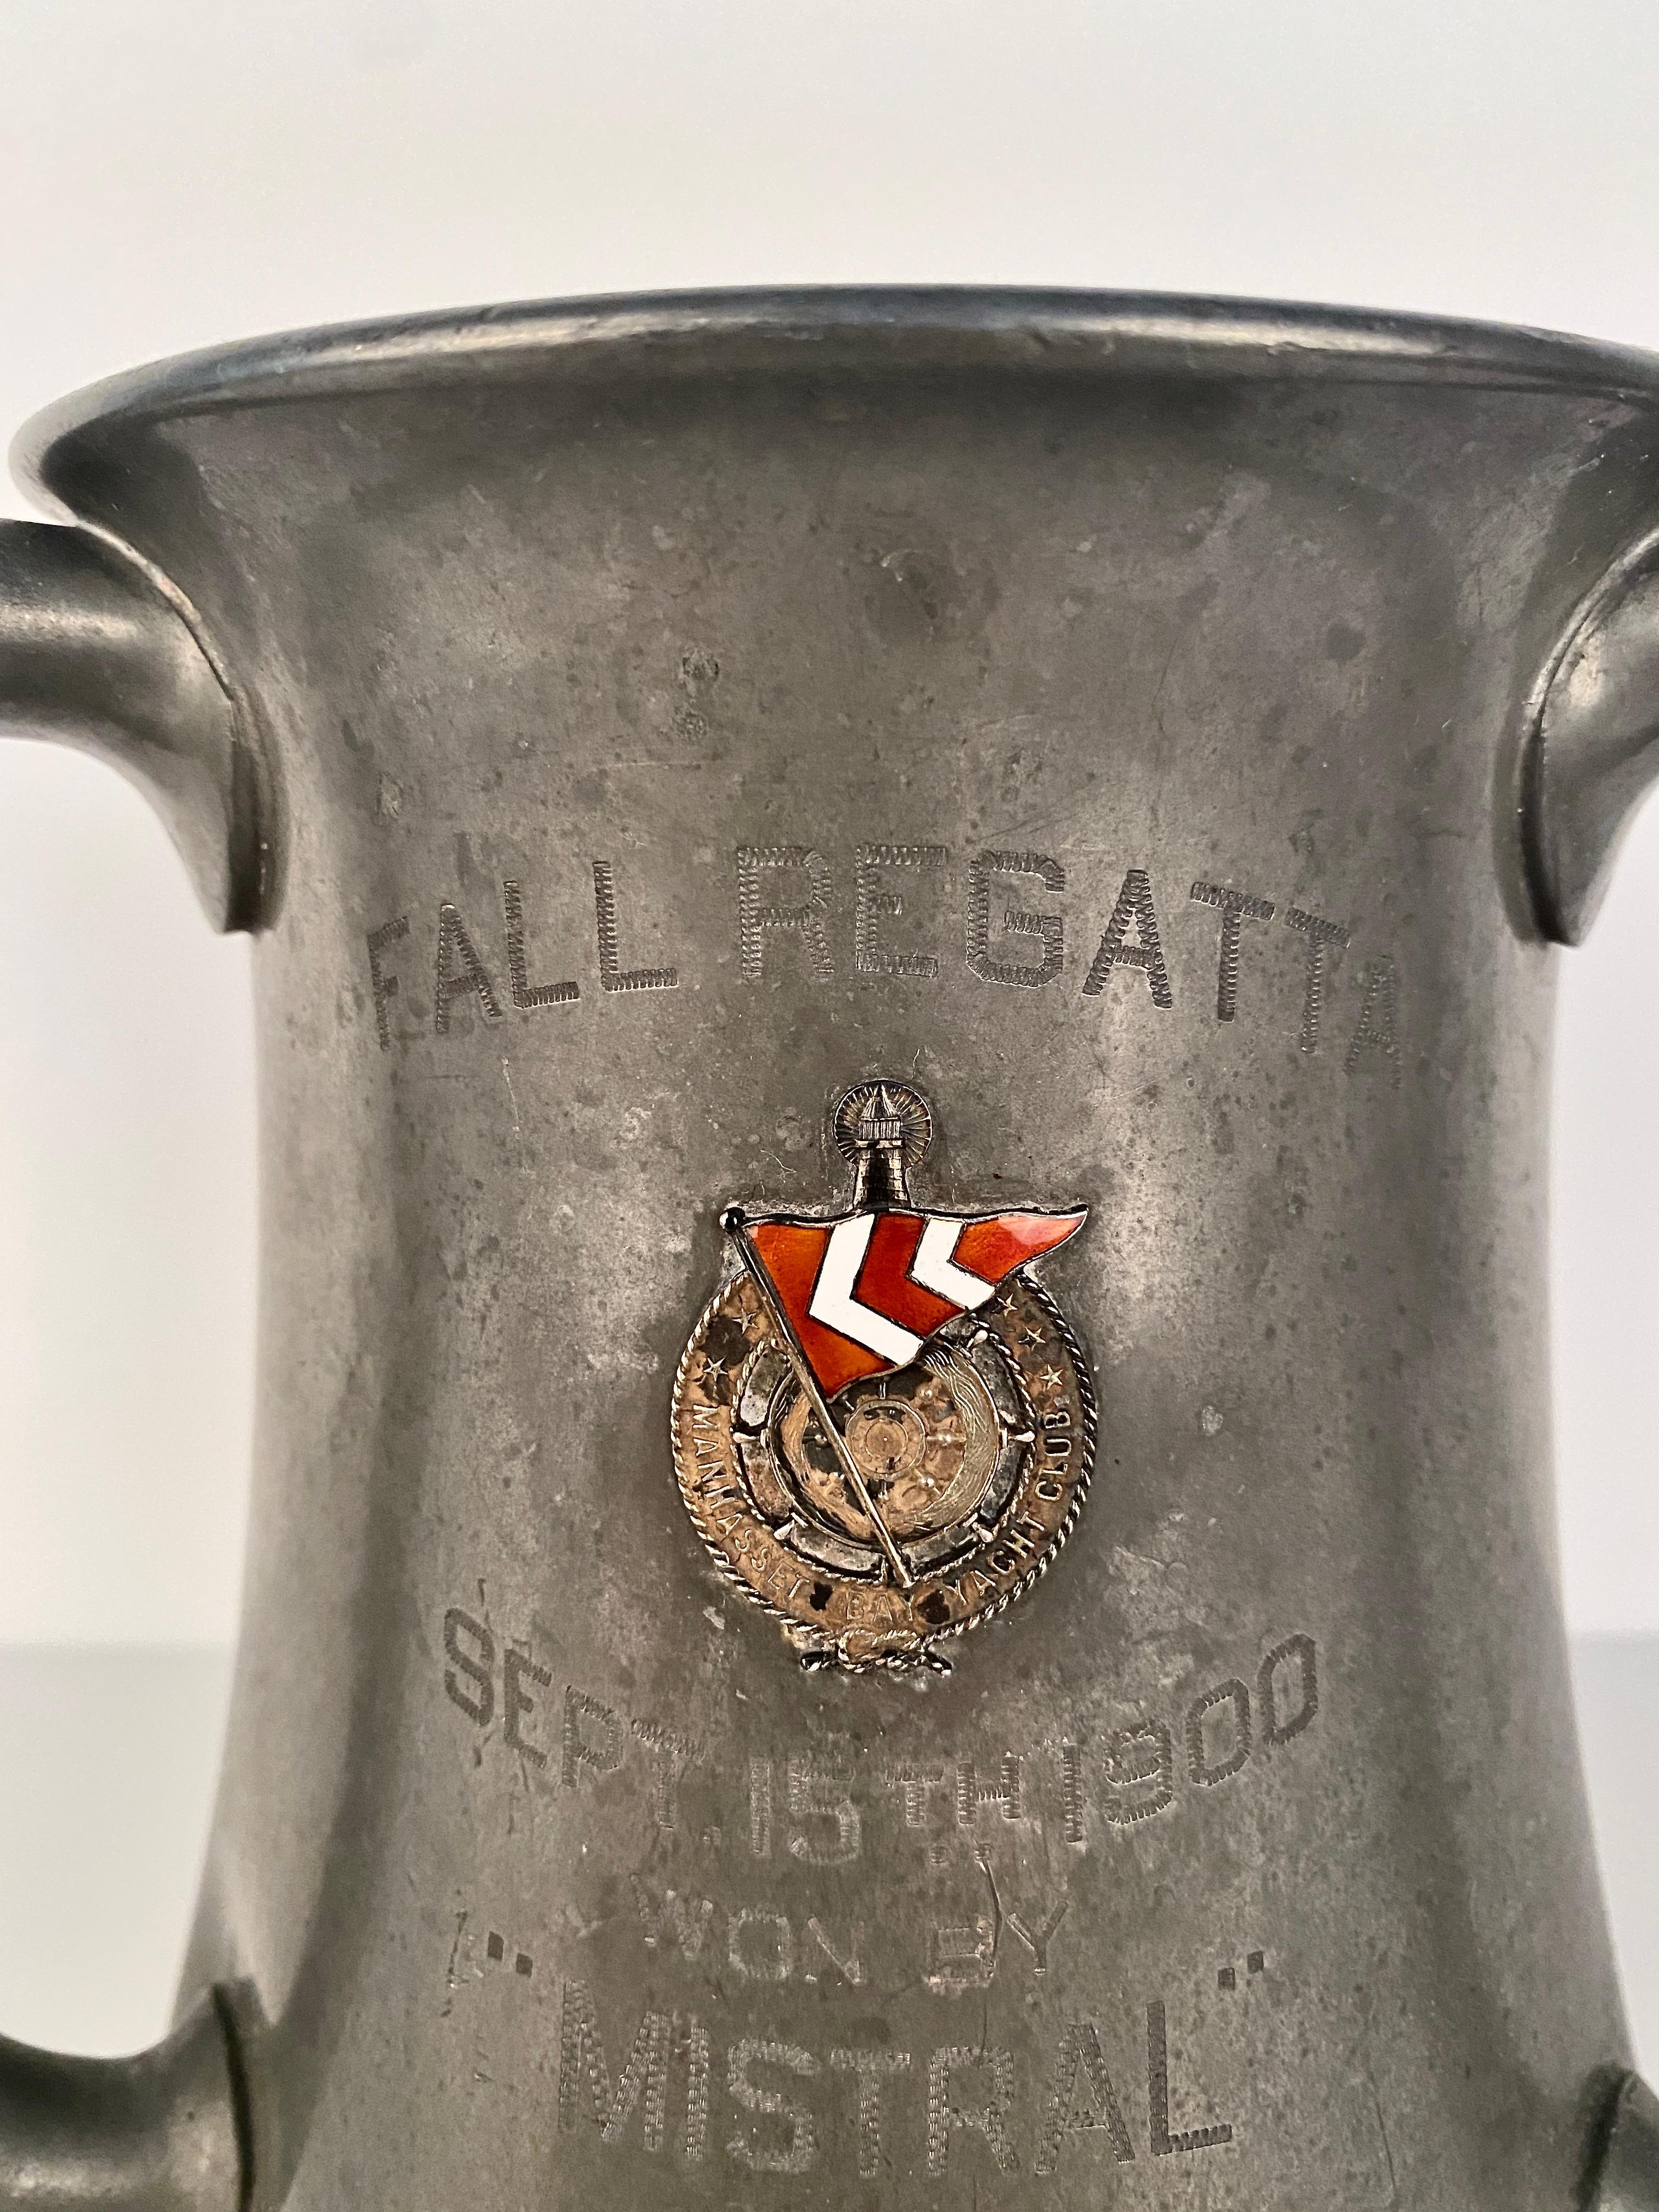 Antique Pewter Yachting Trophy, MHBYC 1900 In Fair Condition For Sale In Norwalk, CT